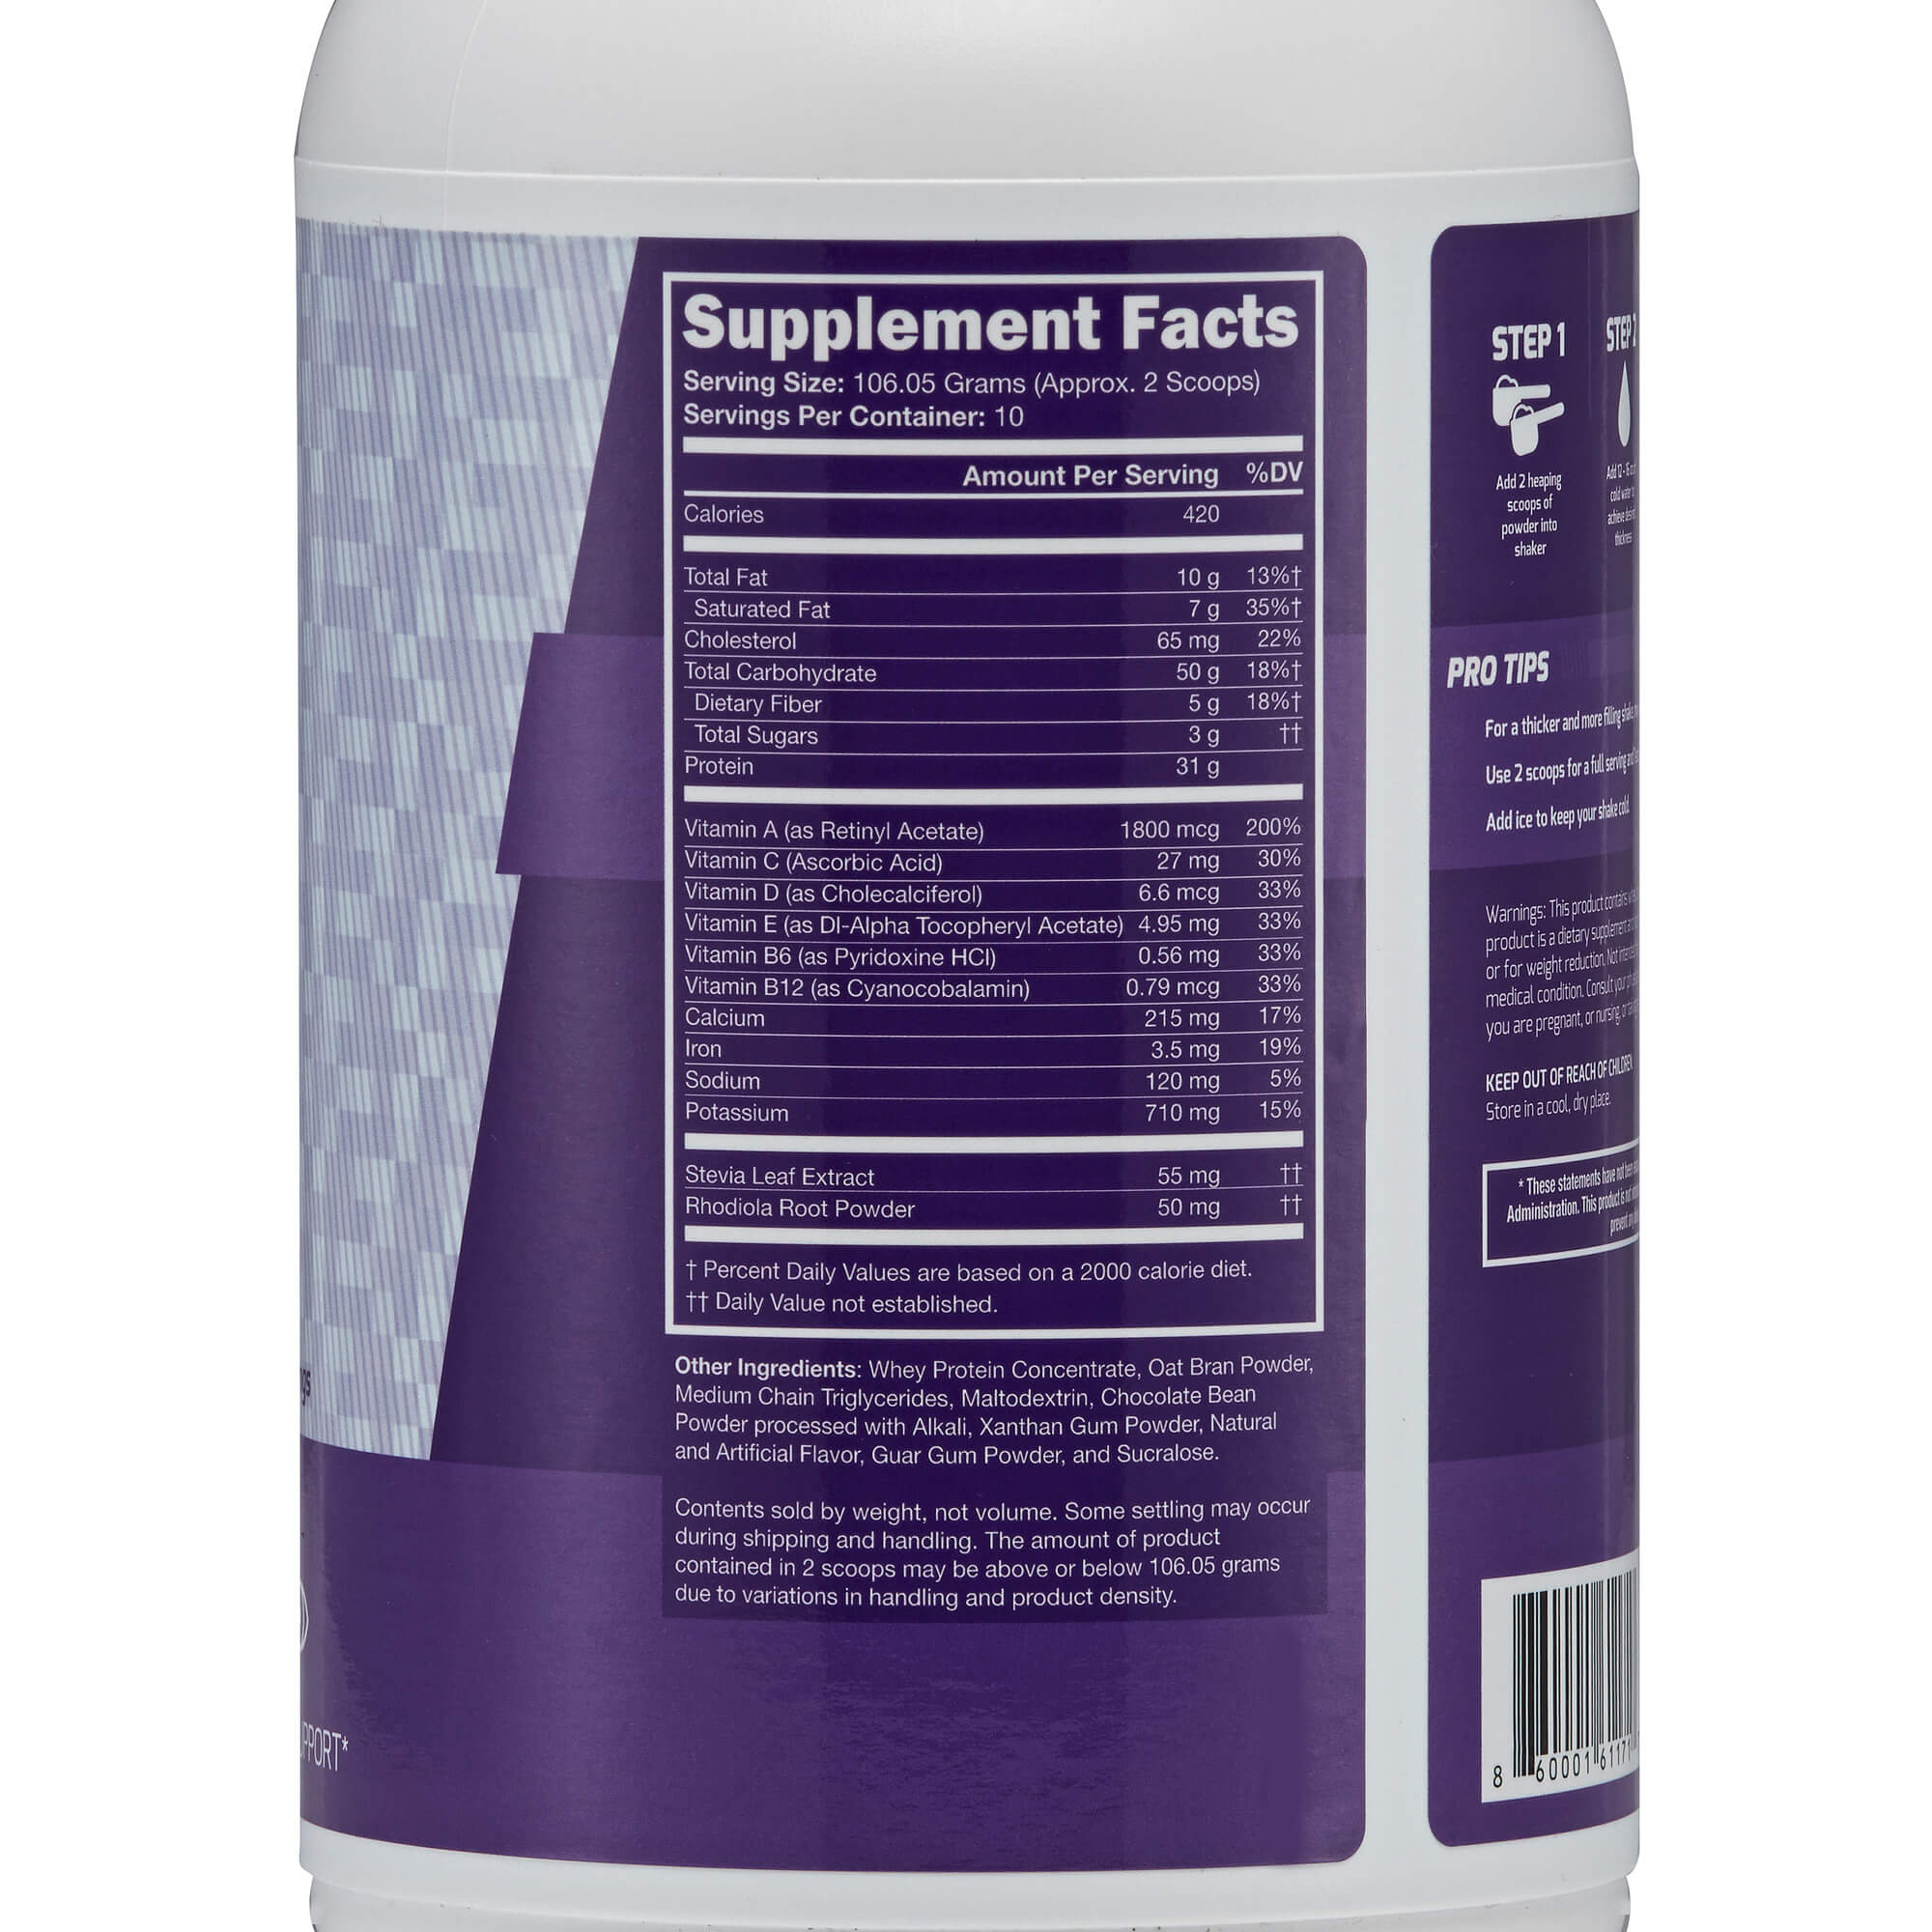 Chocolate meal replacement shake nutrition facts label listing ingredients: whey protein, oat bran powder, MCT, maltodextrin, chocolate bean powder, xanthan gum, flavors, guar gum, sucralose